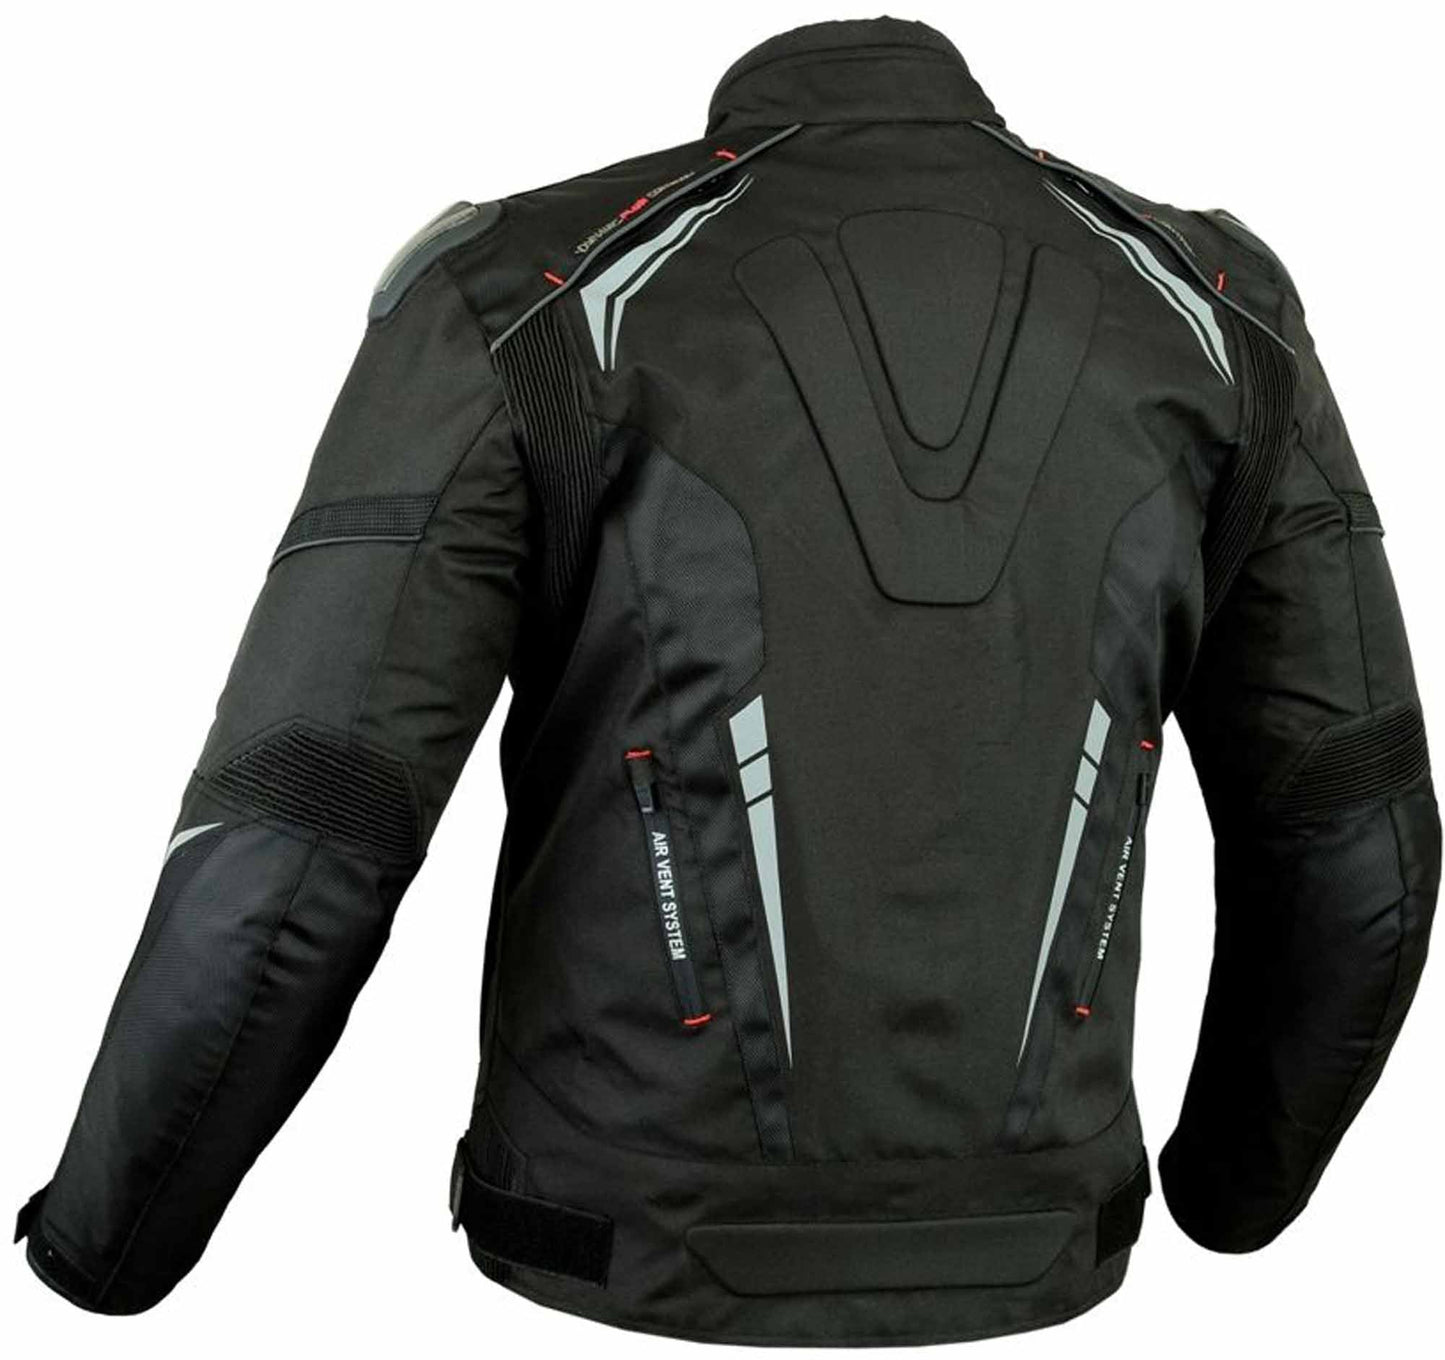 Textile Jacket With Metal Protections & Inside Armor - Waterproof - Unisex